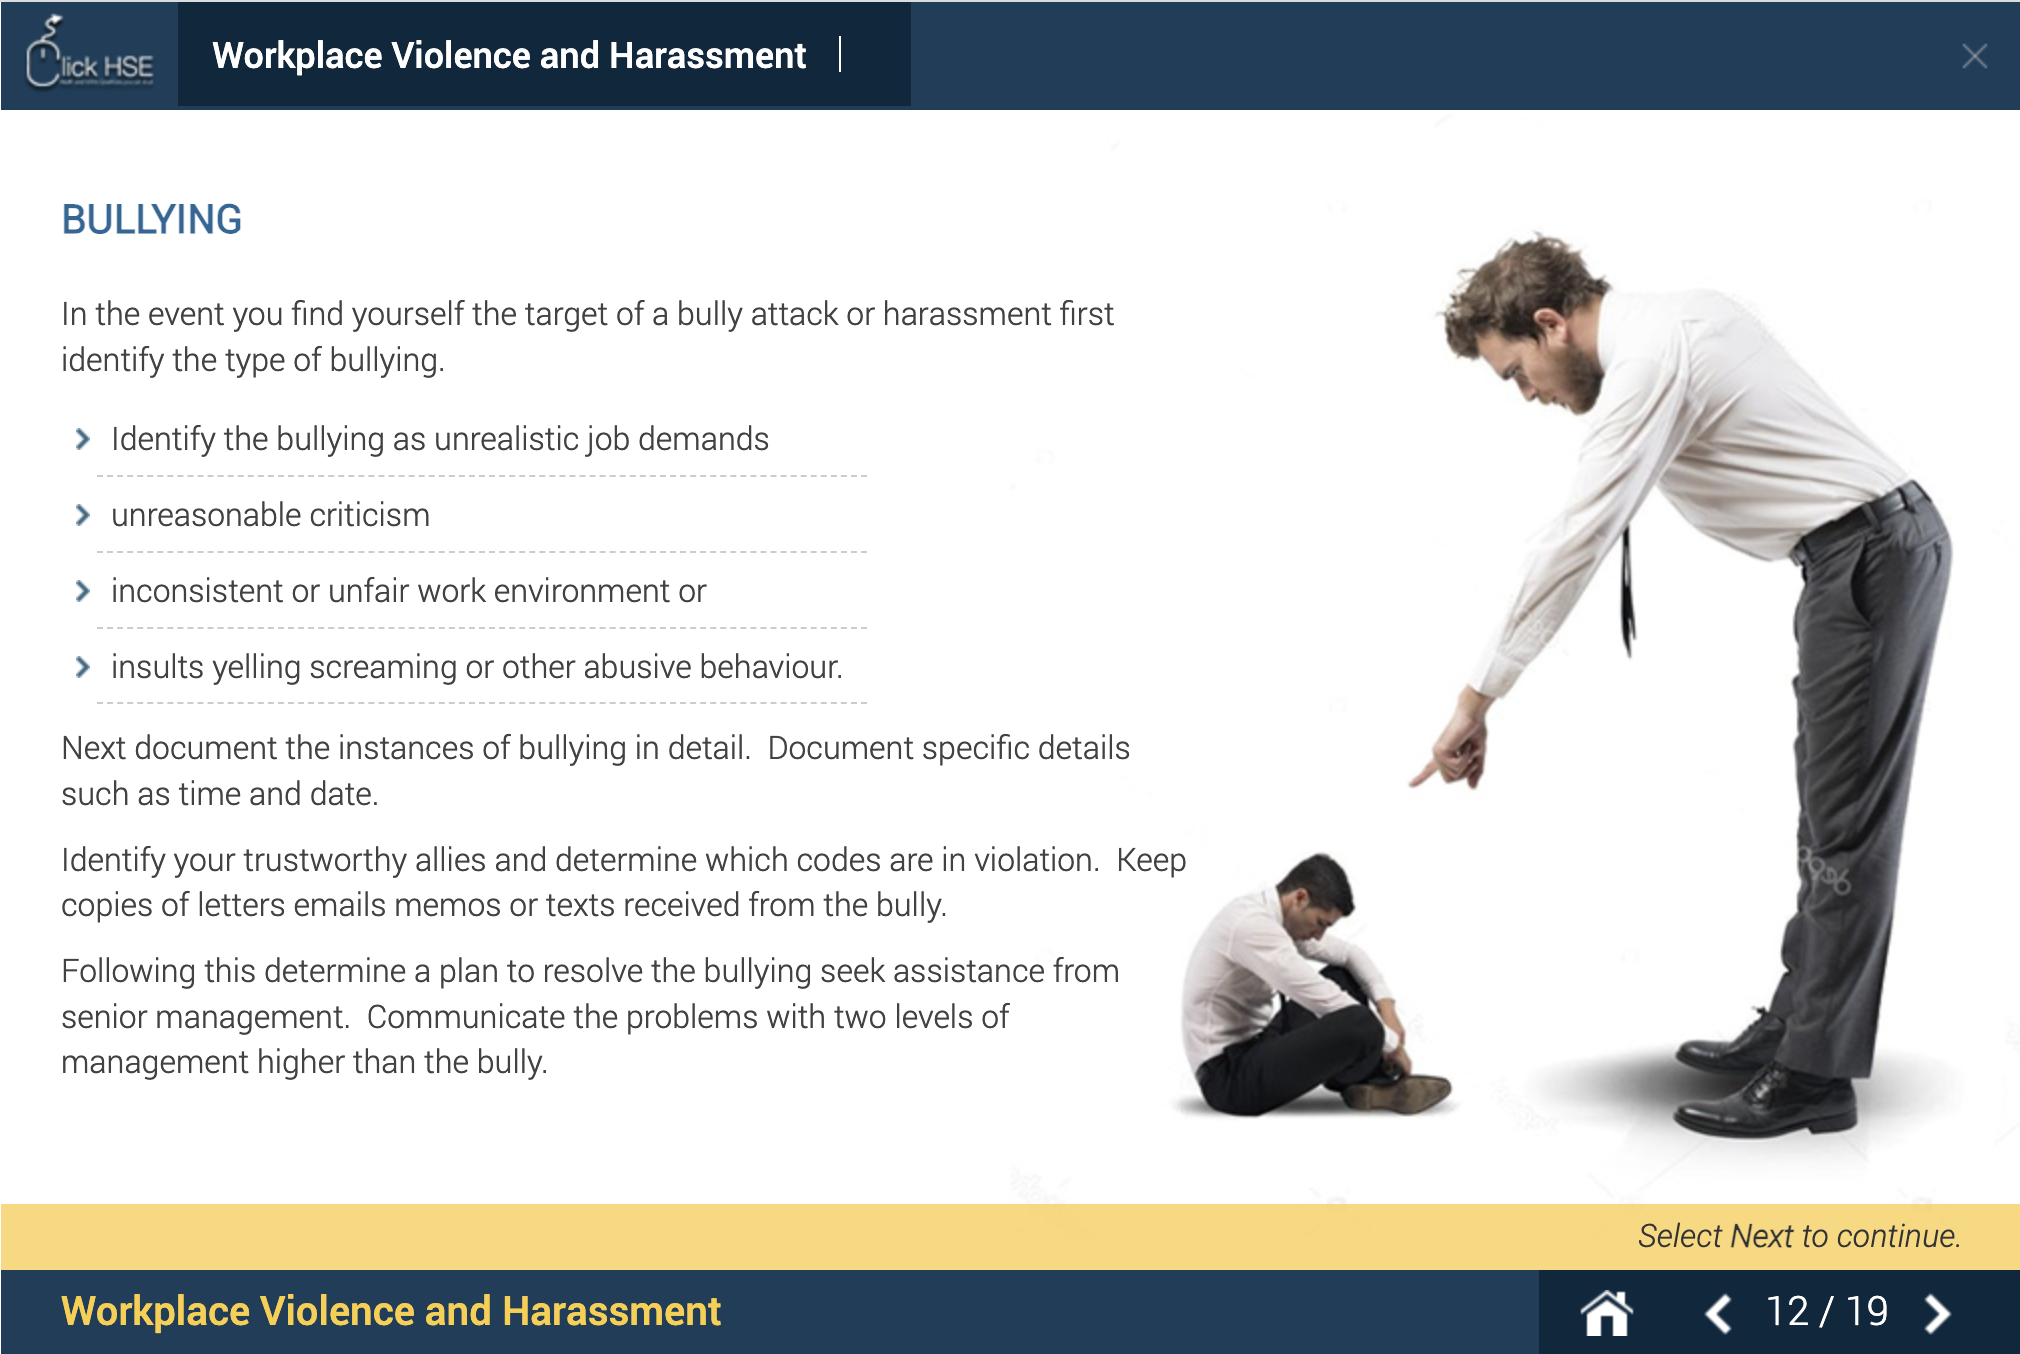 bullying-and-harassment-training-course5.png